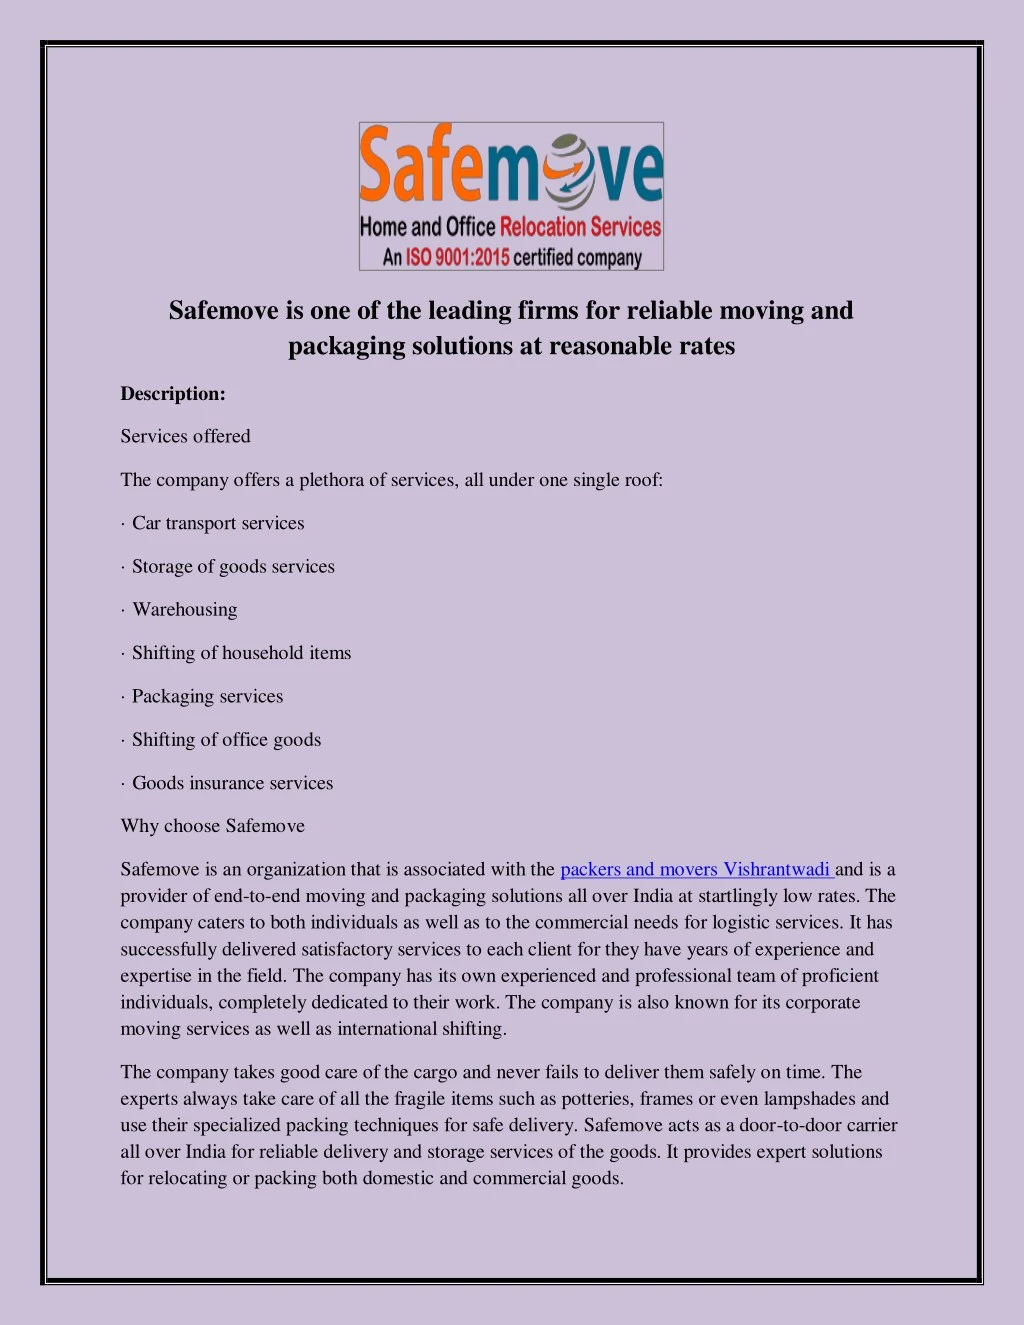 safemove is one of the leading firms for reliable n.